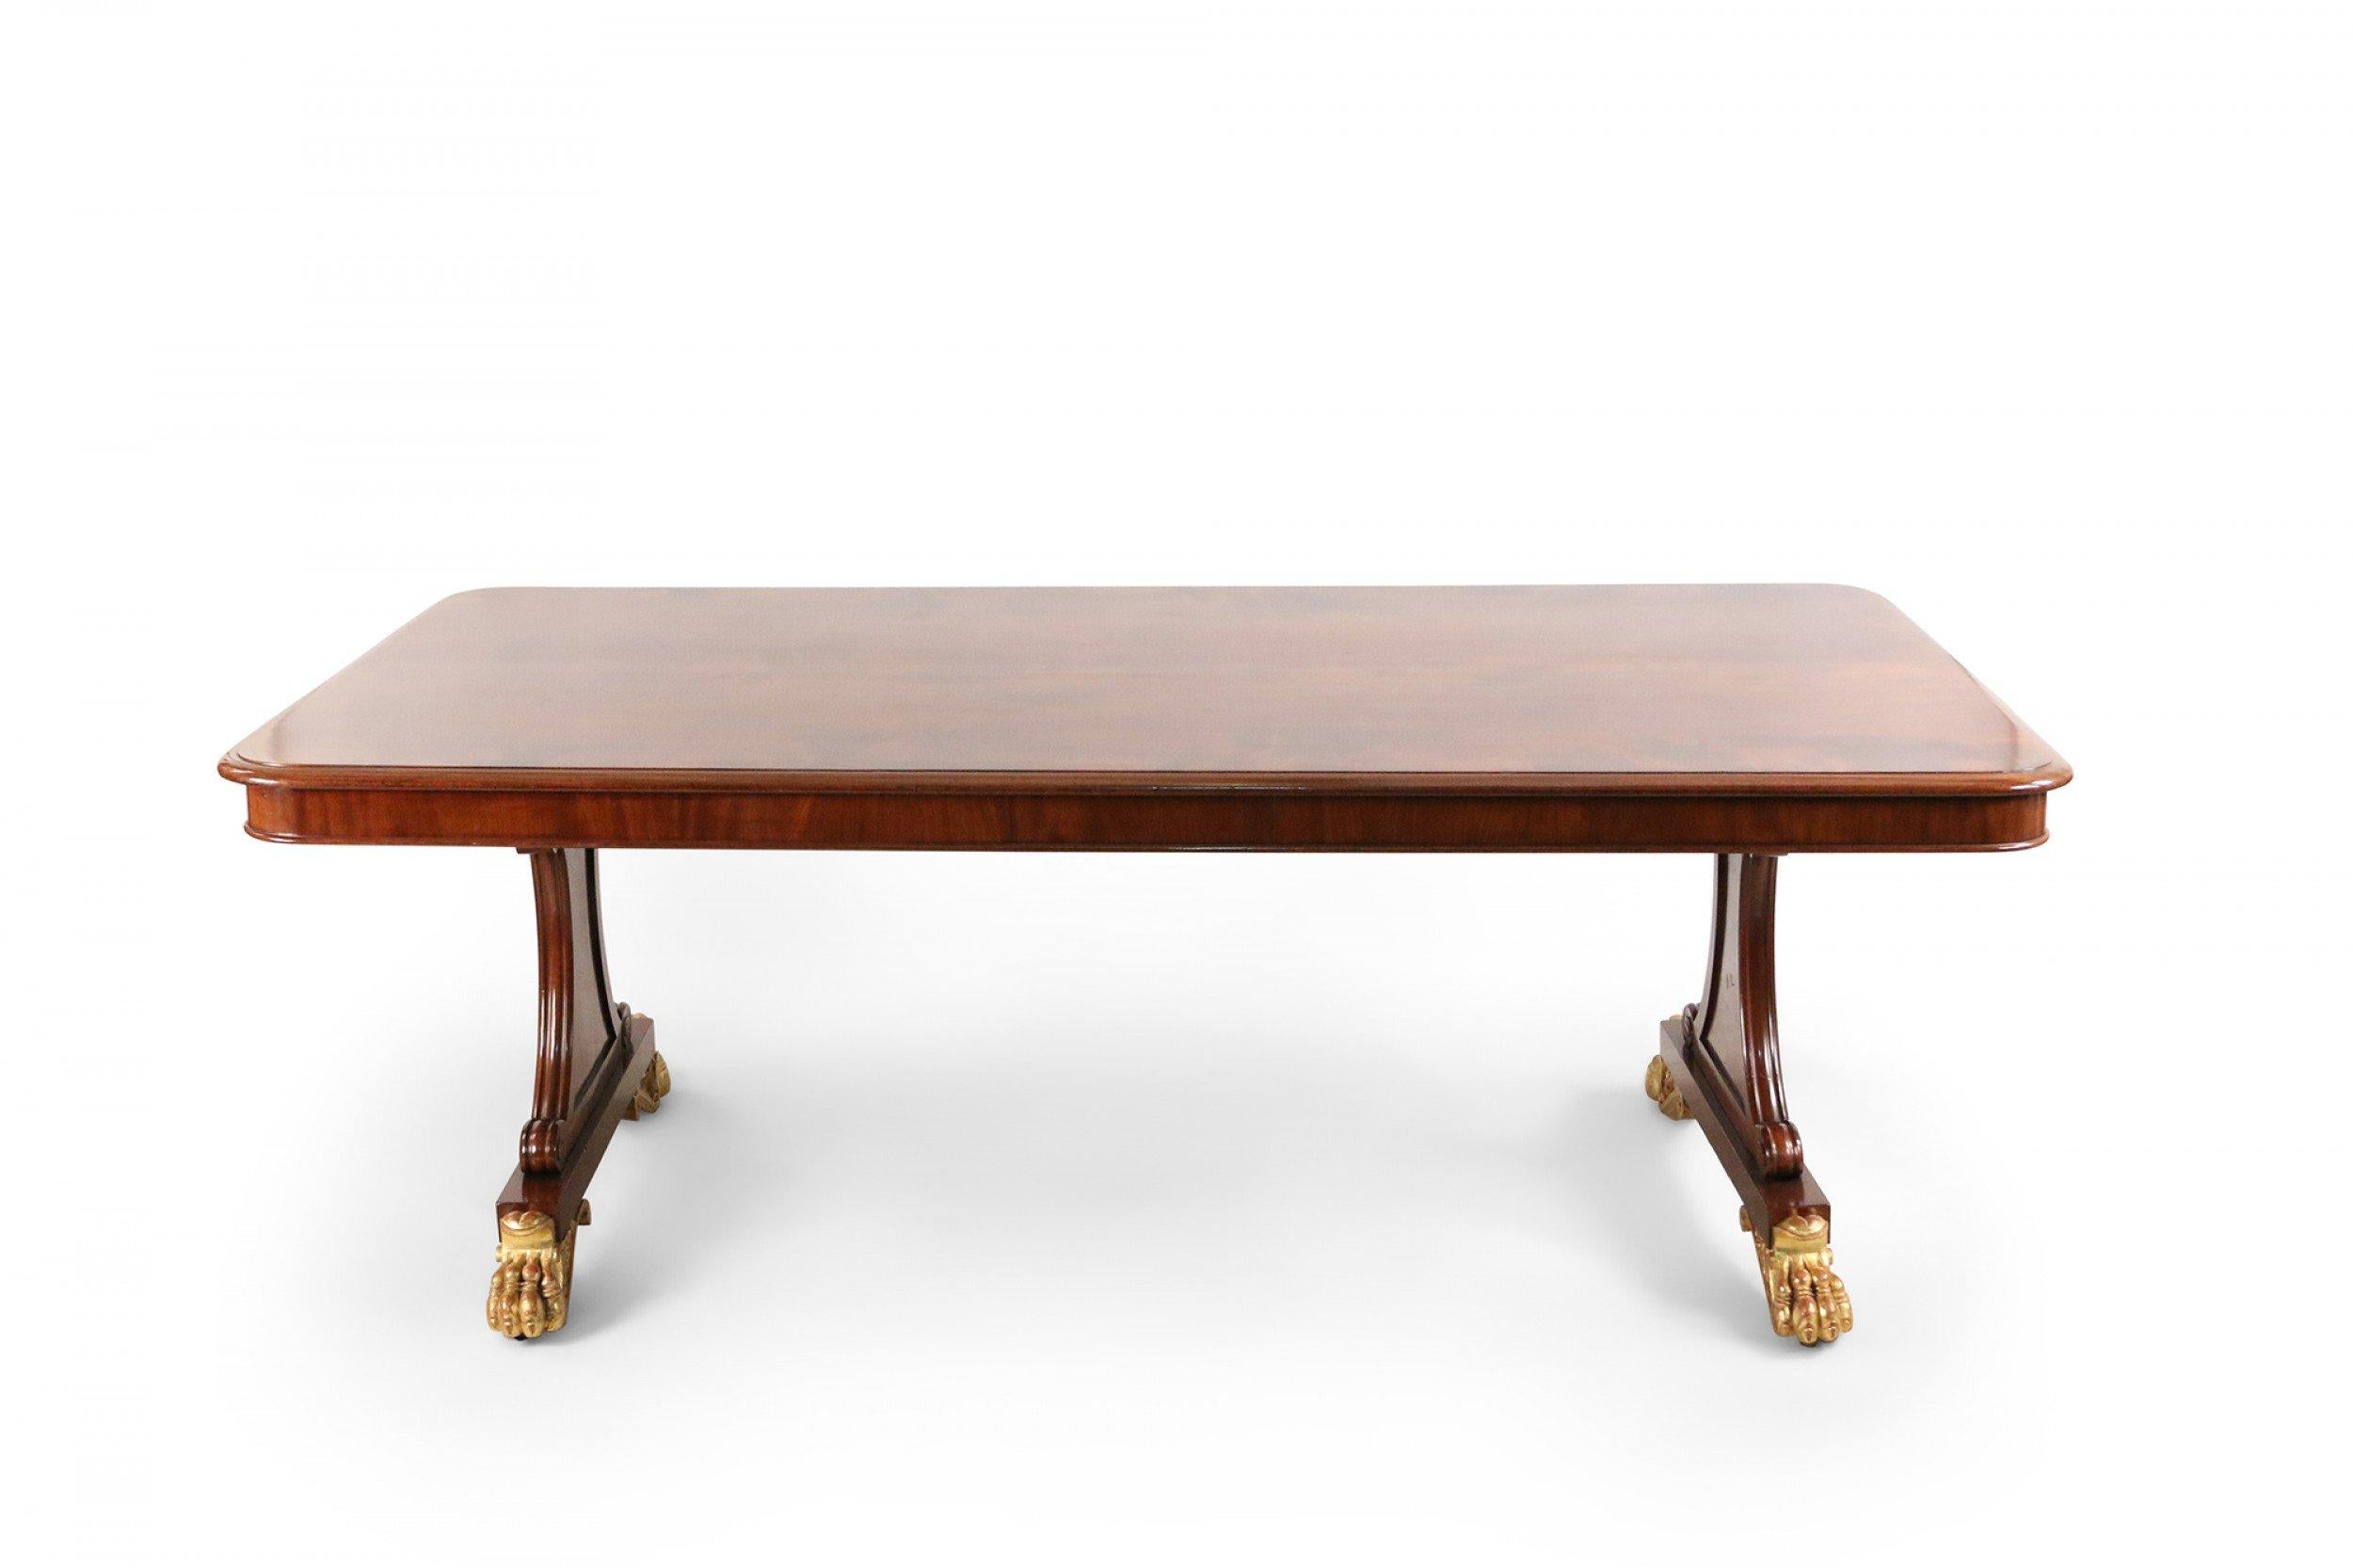 English Regency mahogany double pedestal side rectangular dining table with gilt claw feet.